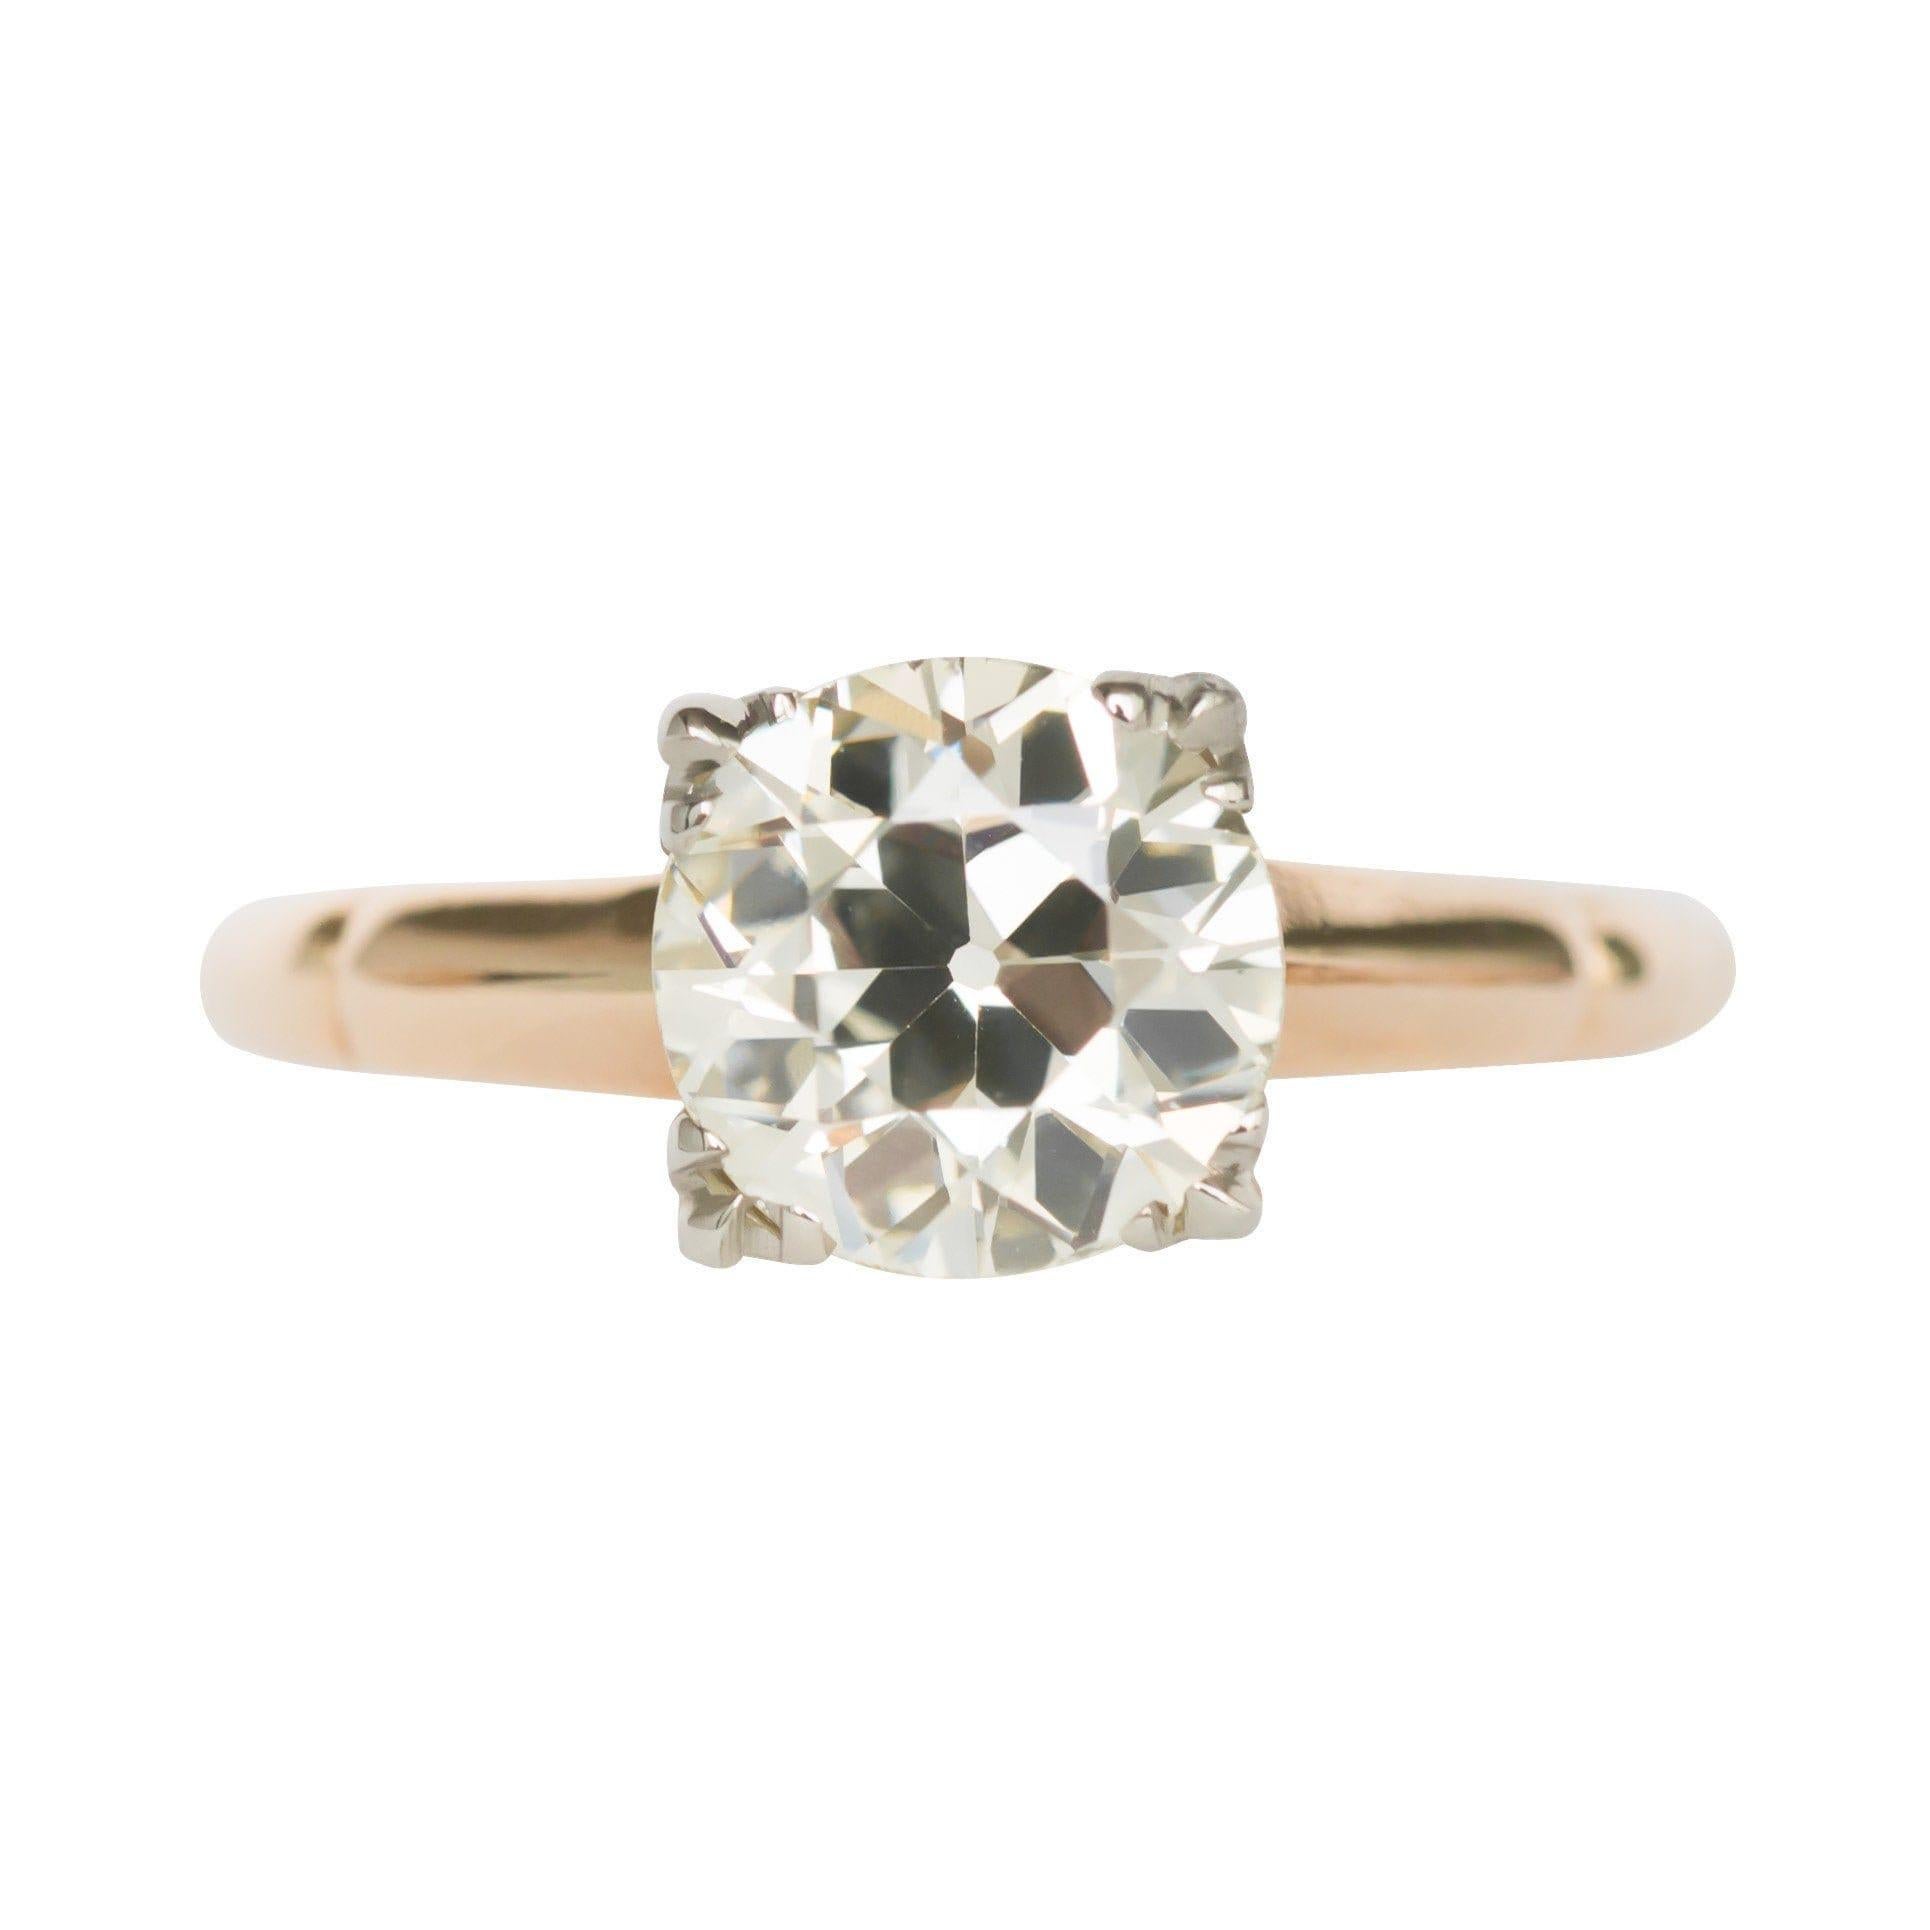 Behold a timeless representation of a diamond solitaire ring from the turn of the century. Gracing this piece is a 1.67-carat Old European cut diamond, renowned for its top-tier clarity, adorned with a nearly flawless VS grade. Its warm body color,